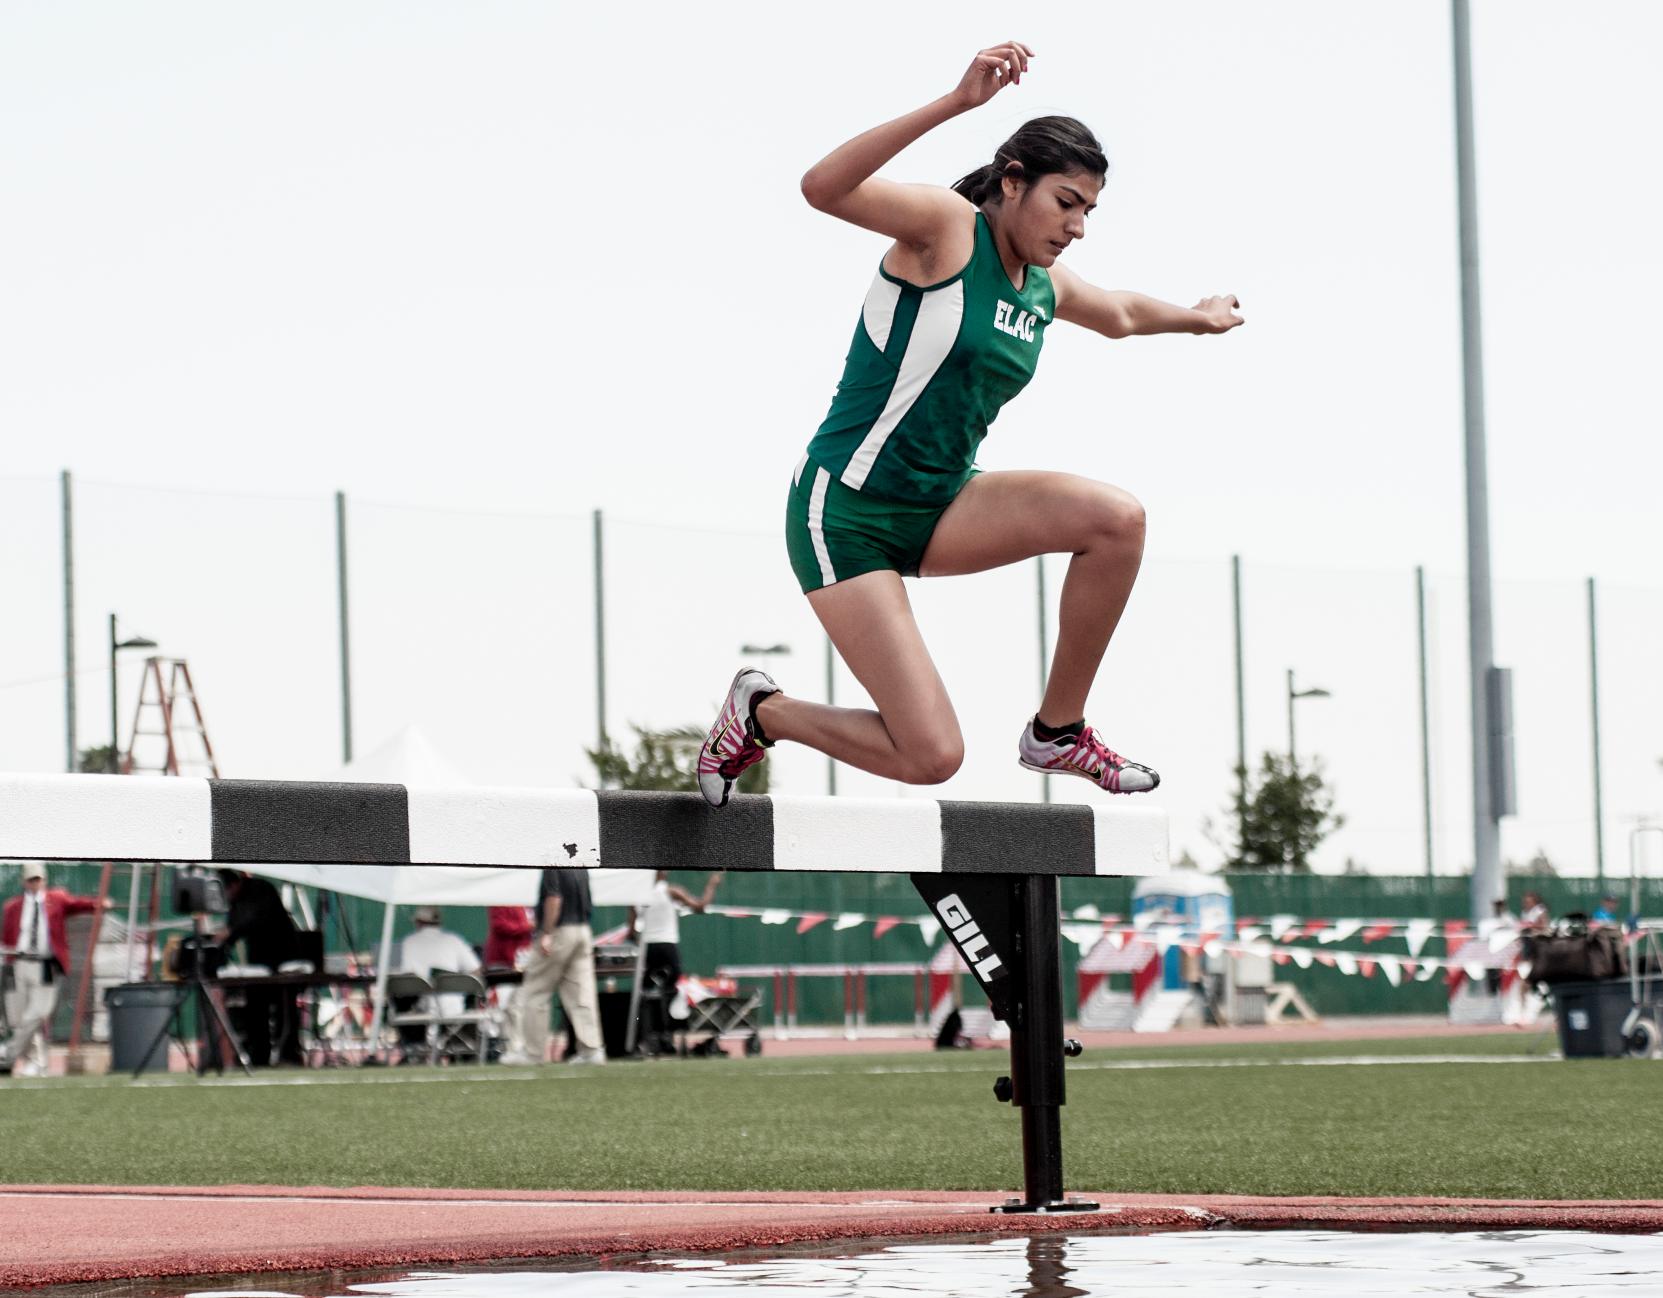 ELAC women’s T&F bolts in running events